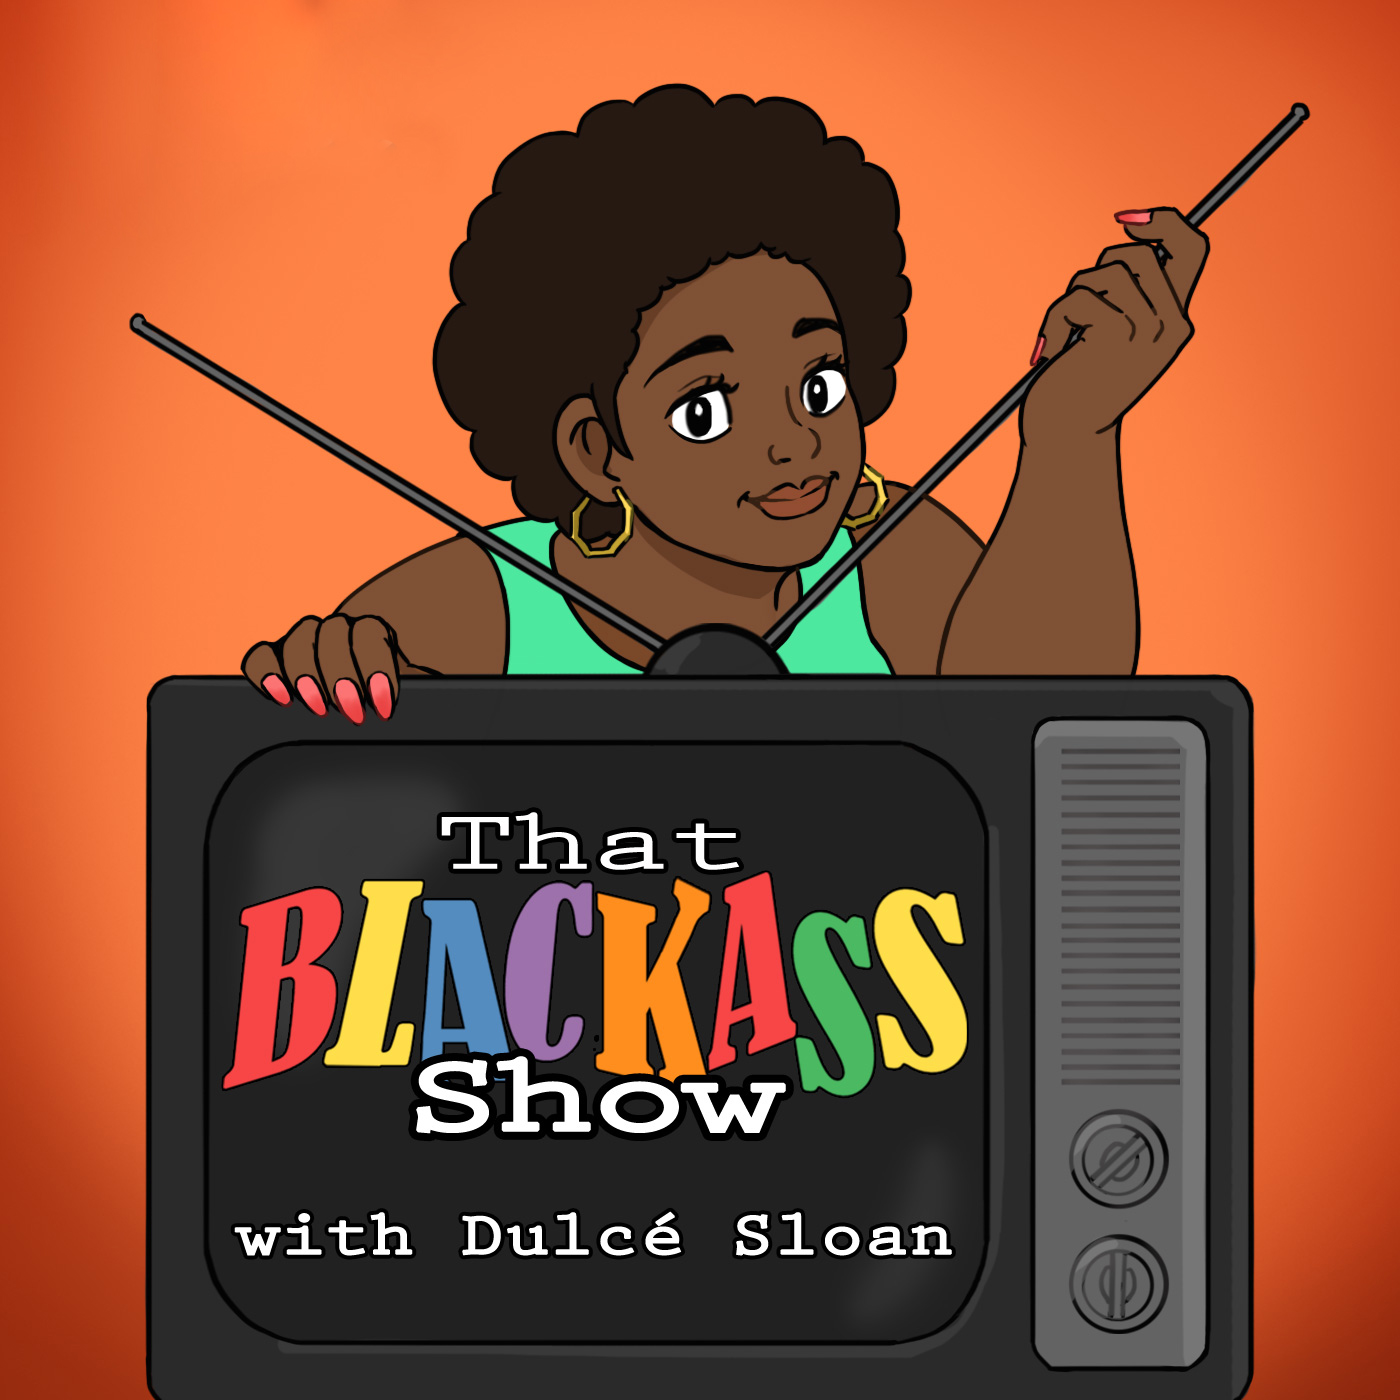 That Blackass Show Podcast Cover - Square